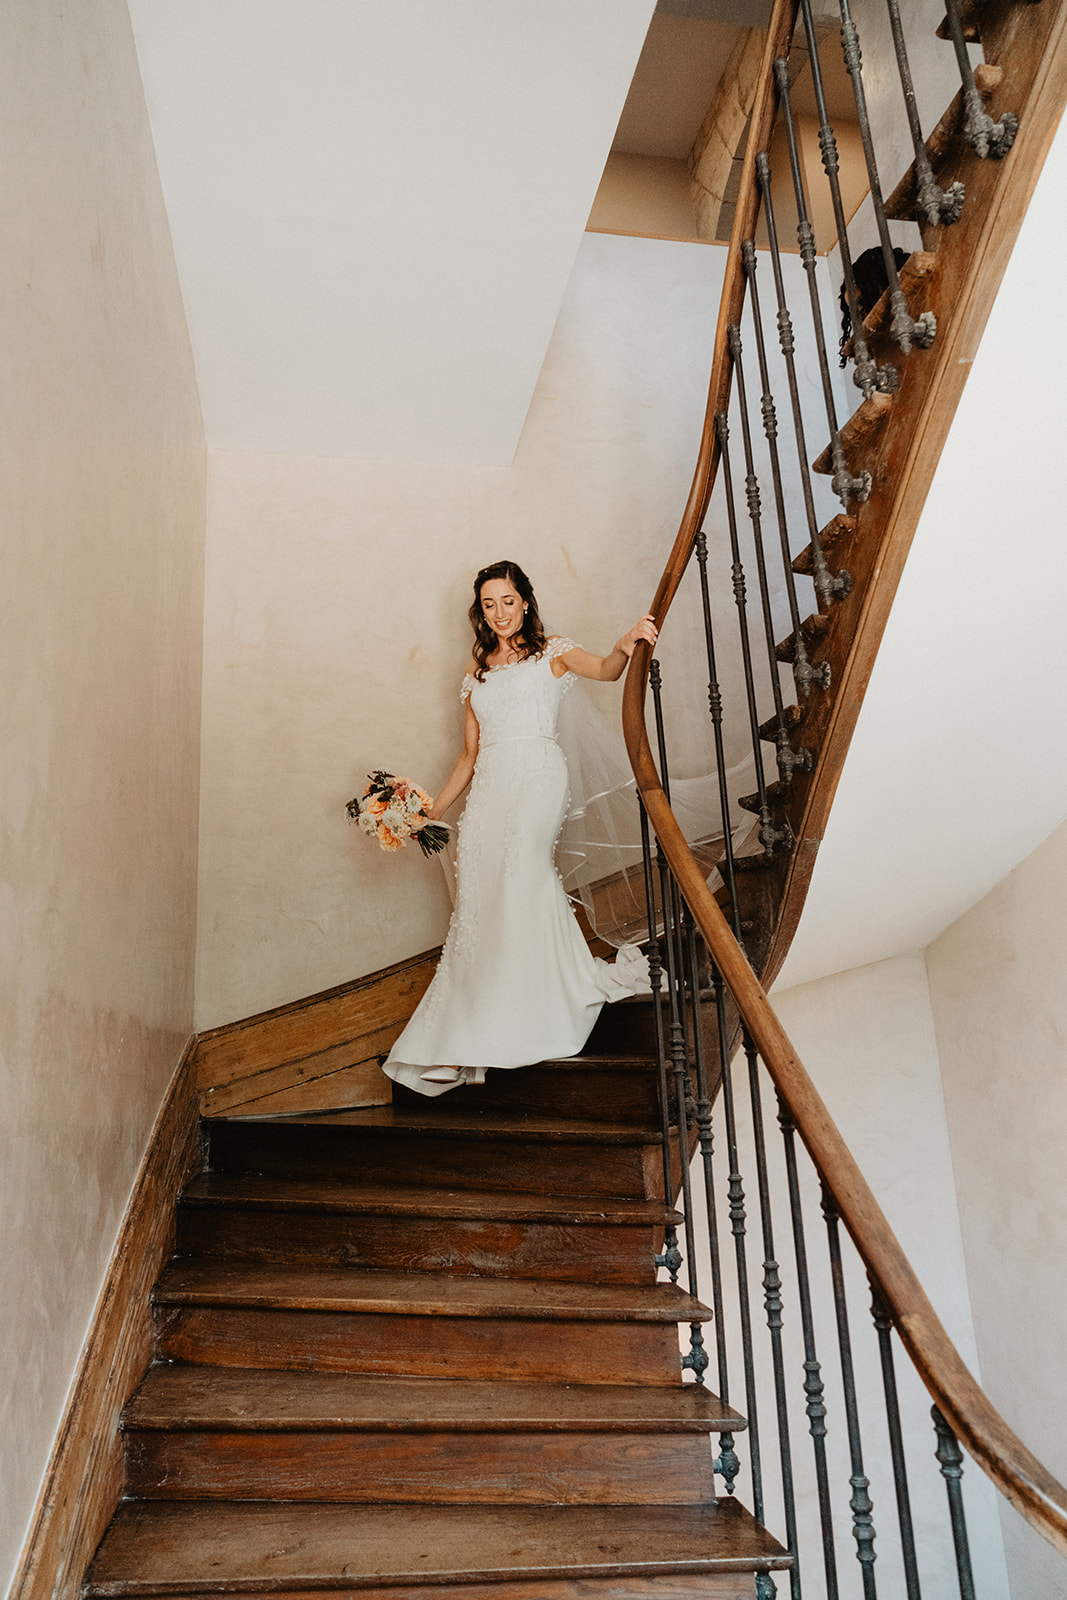 French wedding photos and video duo at château fengari